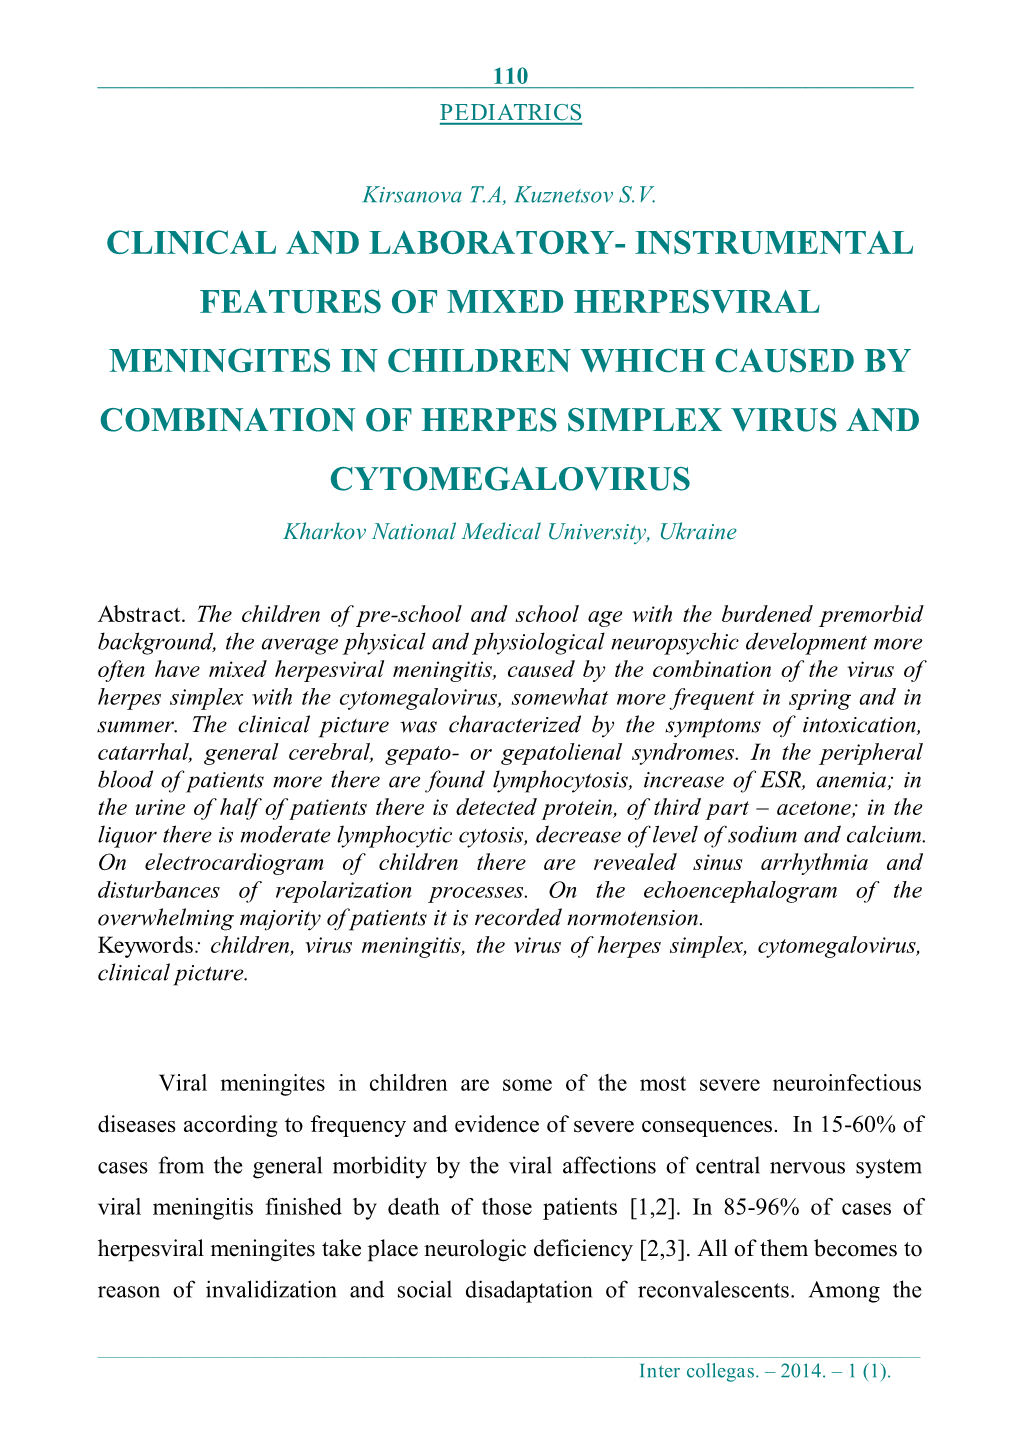 Clinical and Laboratory- Instrumental Features of Mixed Herpesviral Meningites in Children Which Caused by Combination of Herpes